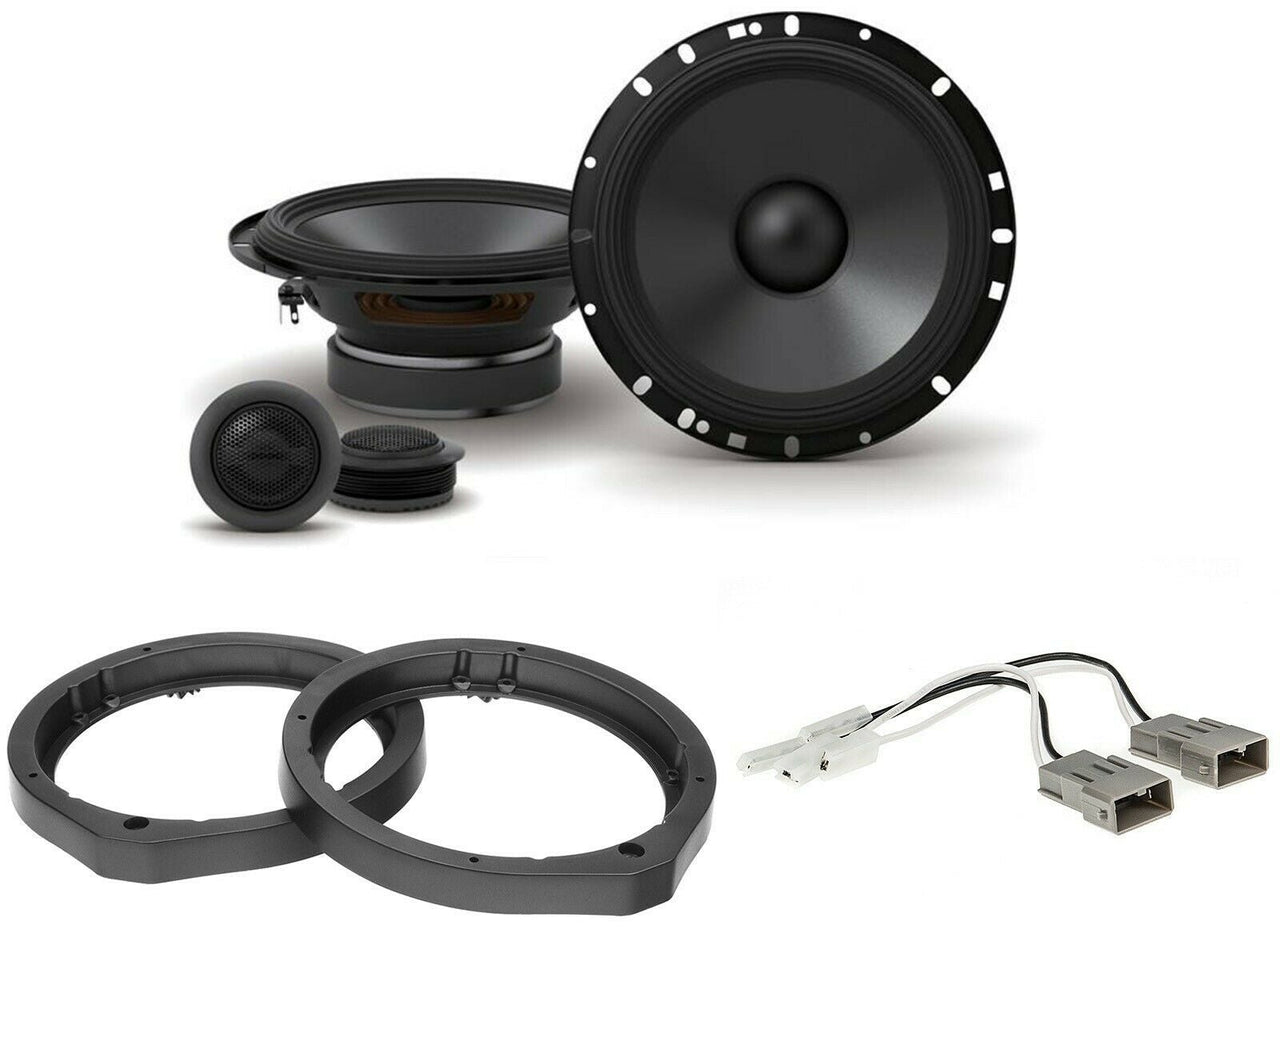 Alpine S-S65C + Front or Rear Speaker Adapters + Harness For Select Honda and Acura Vehicles